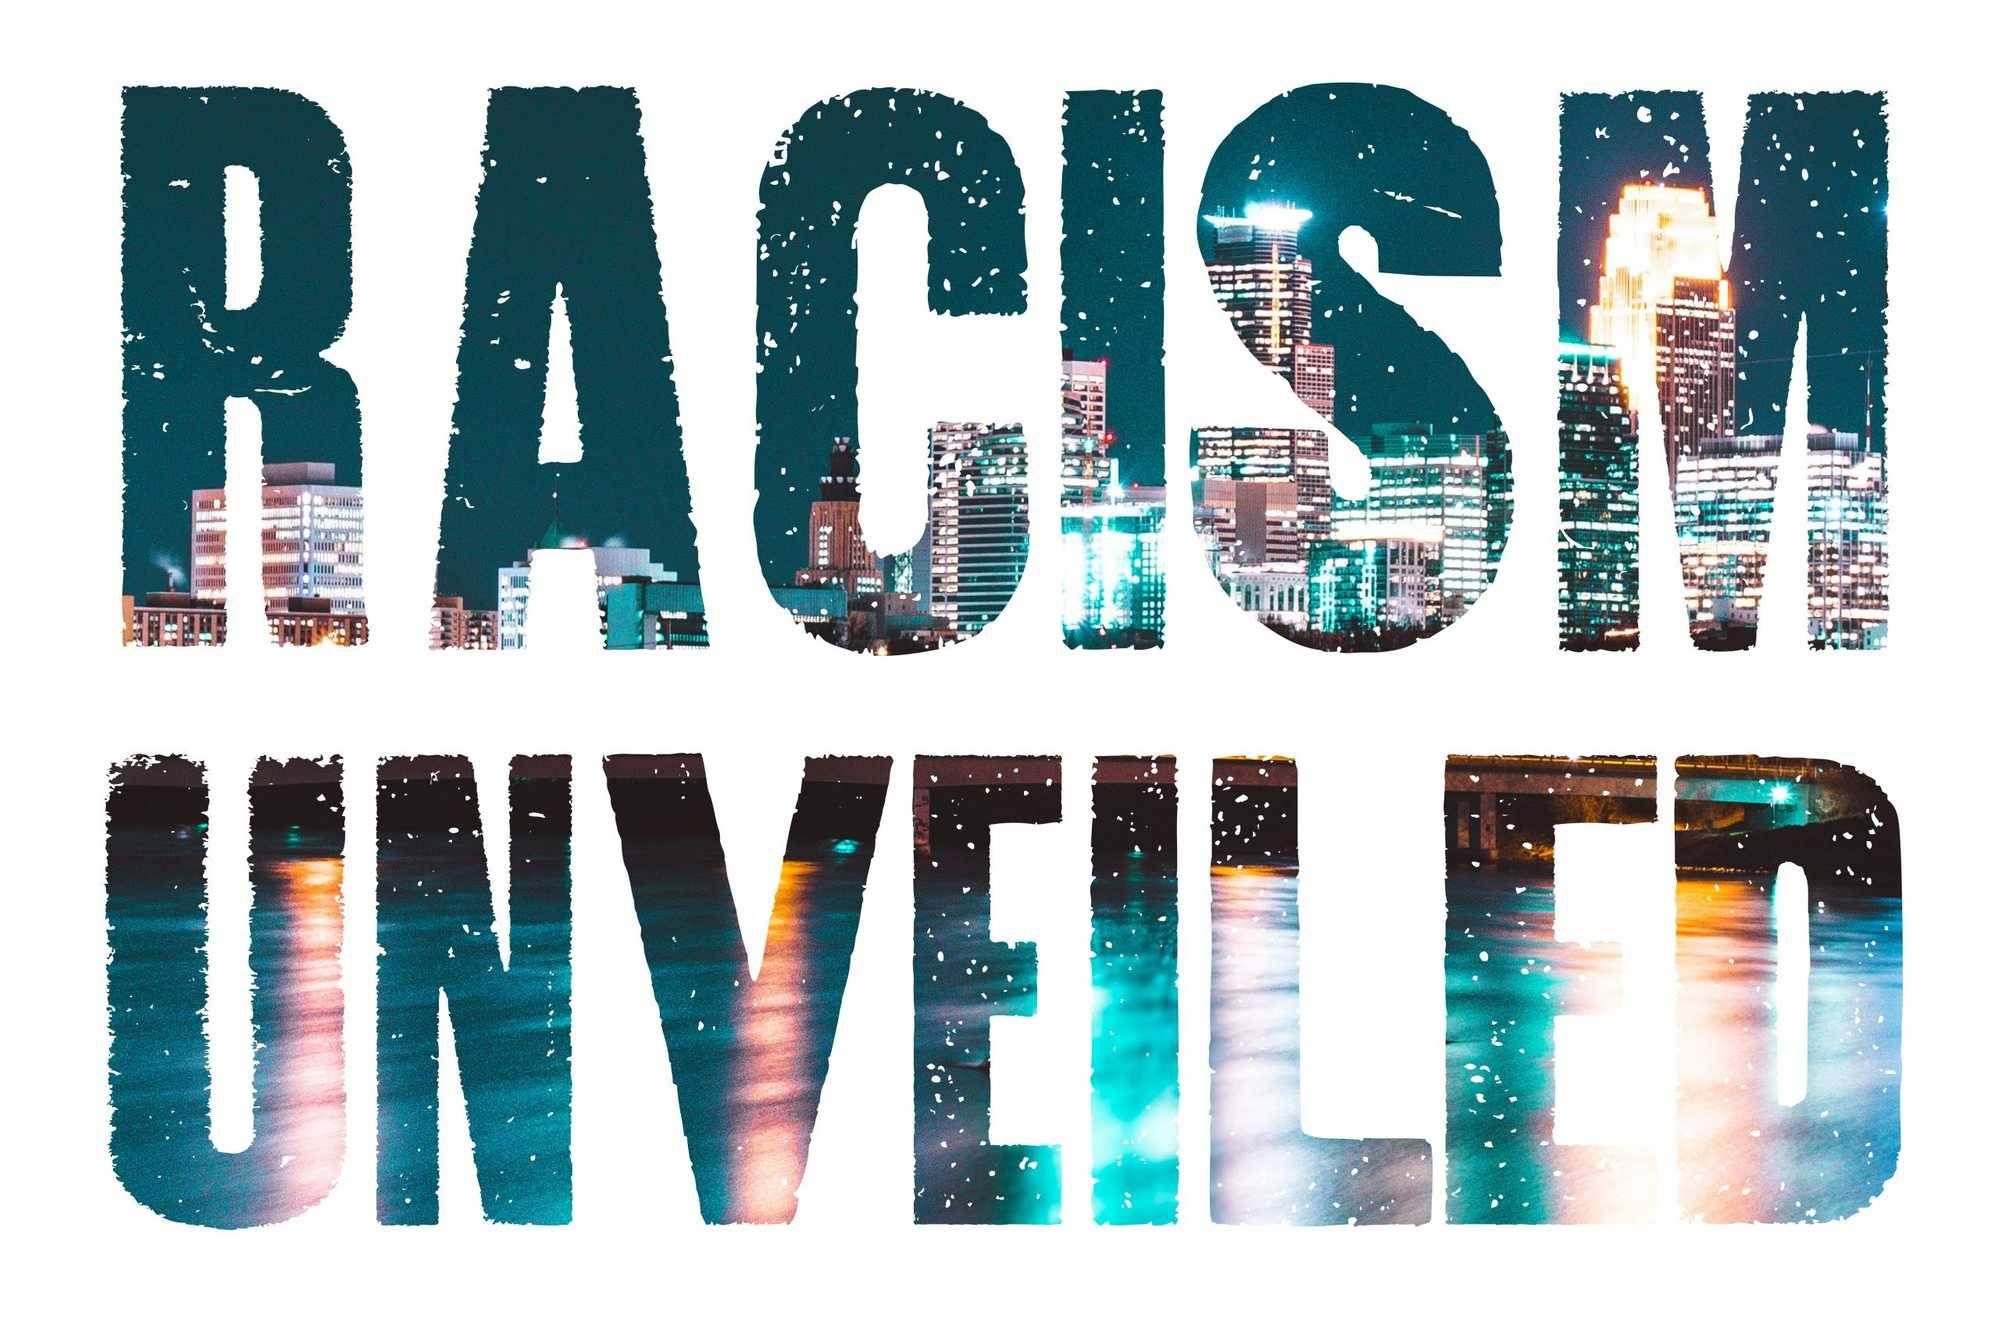 Racism Unveiled title image, includes image of the skyline of Minneapolis within the letters of the title.  